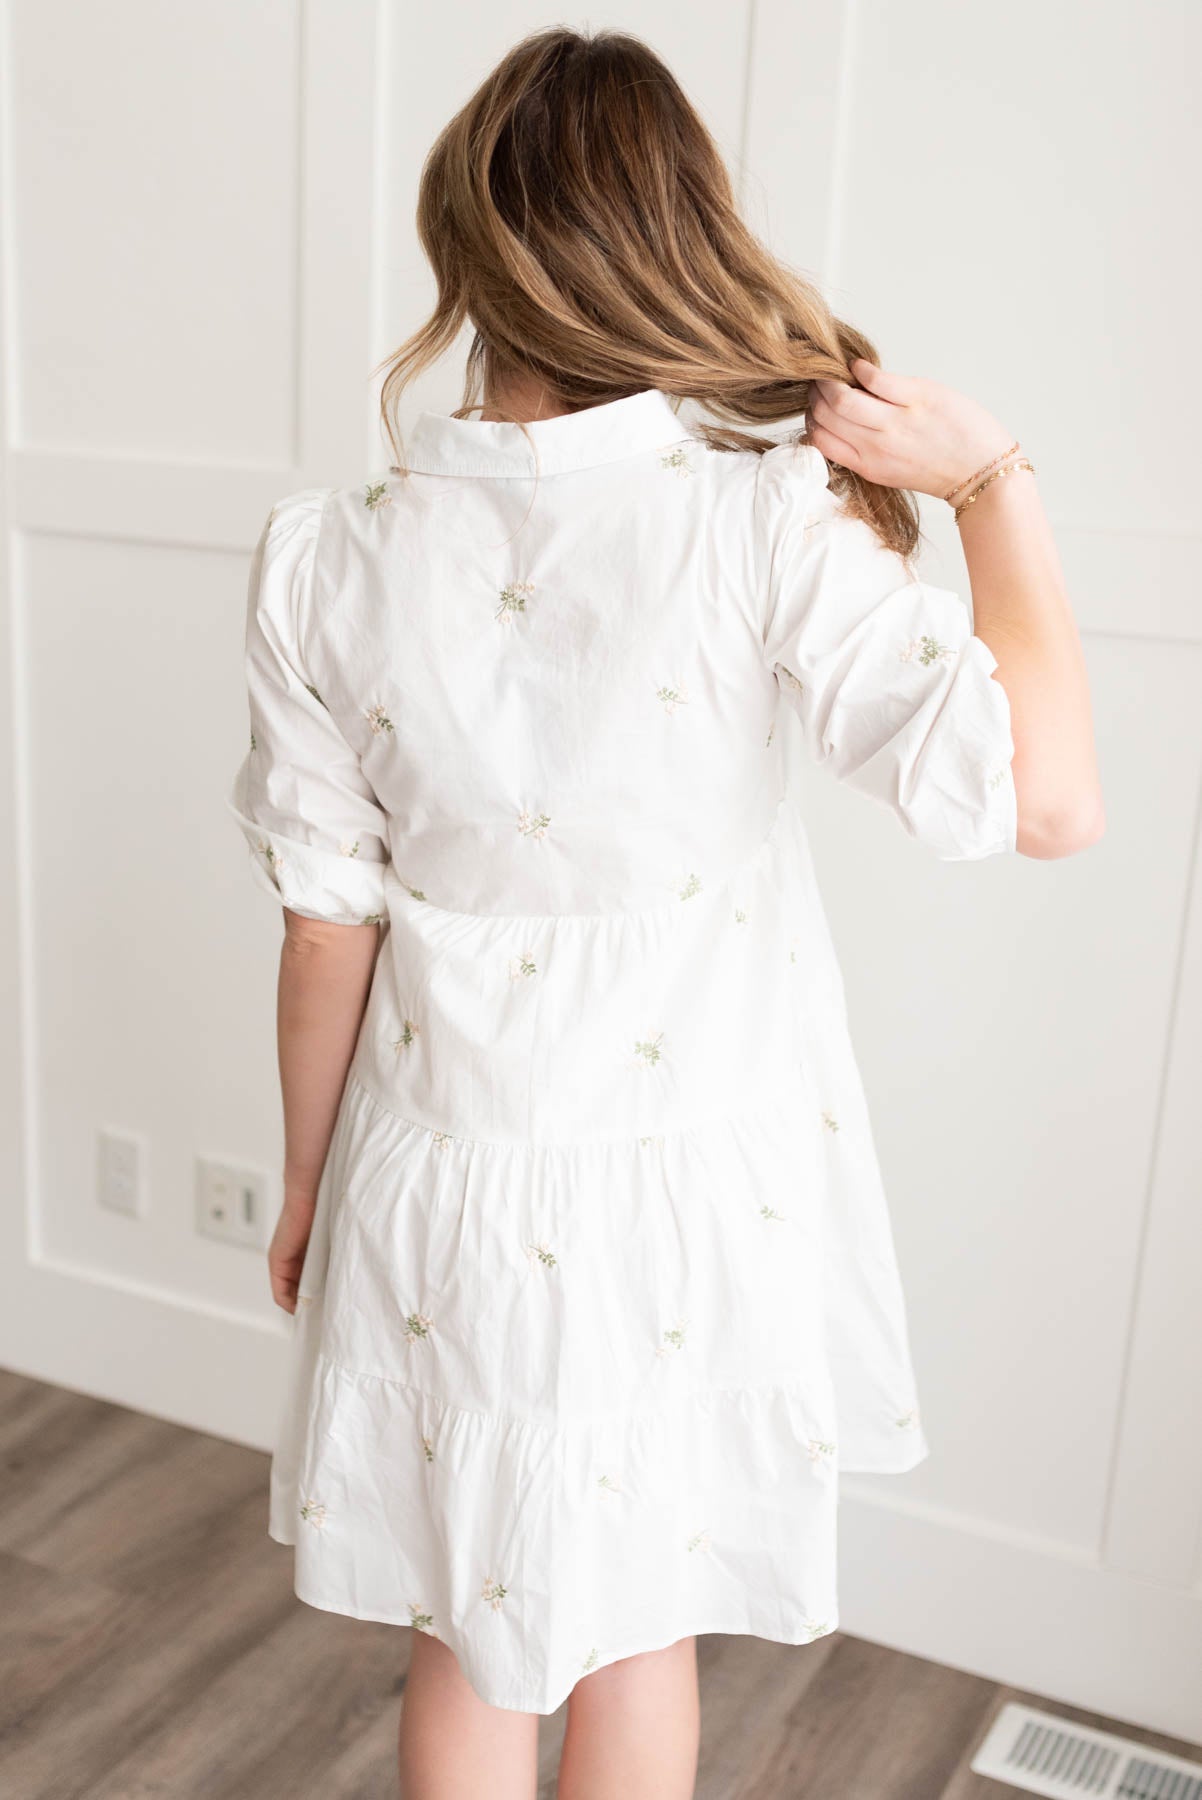 Back view of the ivory embroidered button down dress